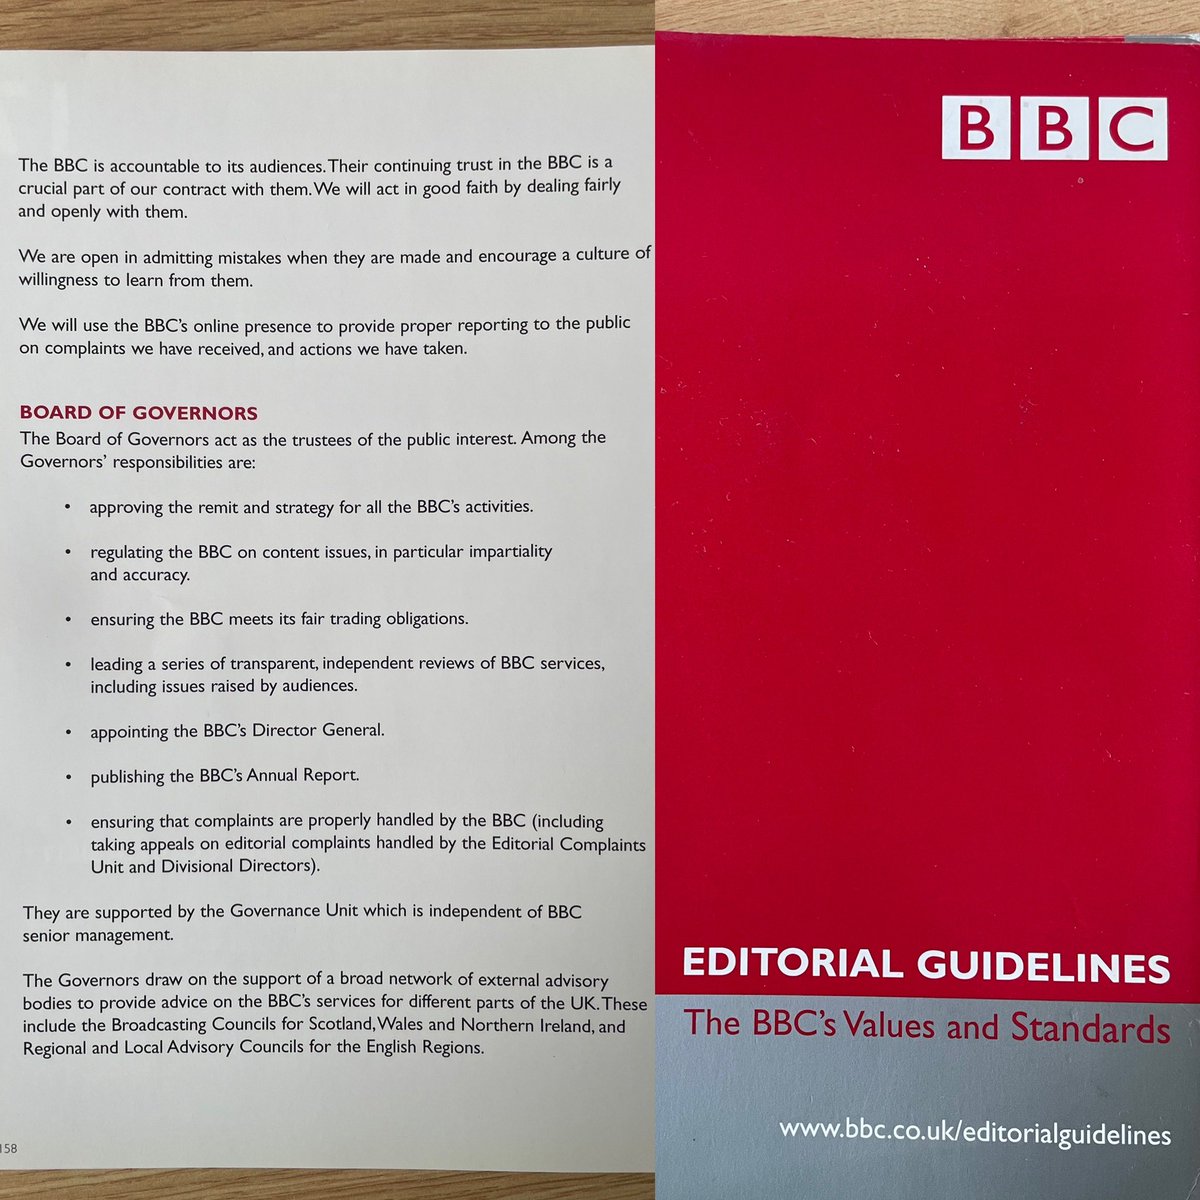 Excellent thread. Permit me to draw attention to role of BBC Board, Chairman & Director General from my copy of guidelines. By taking Lineker off air has the Board undermined it’s own ‘alleged’ standards, responsibility & reputation for impartiality #NeverBeABystander #motd